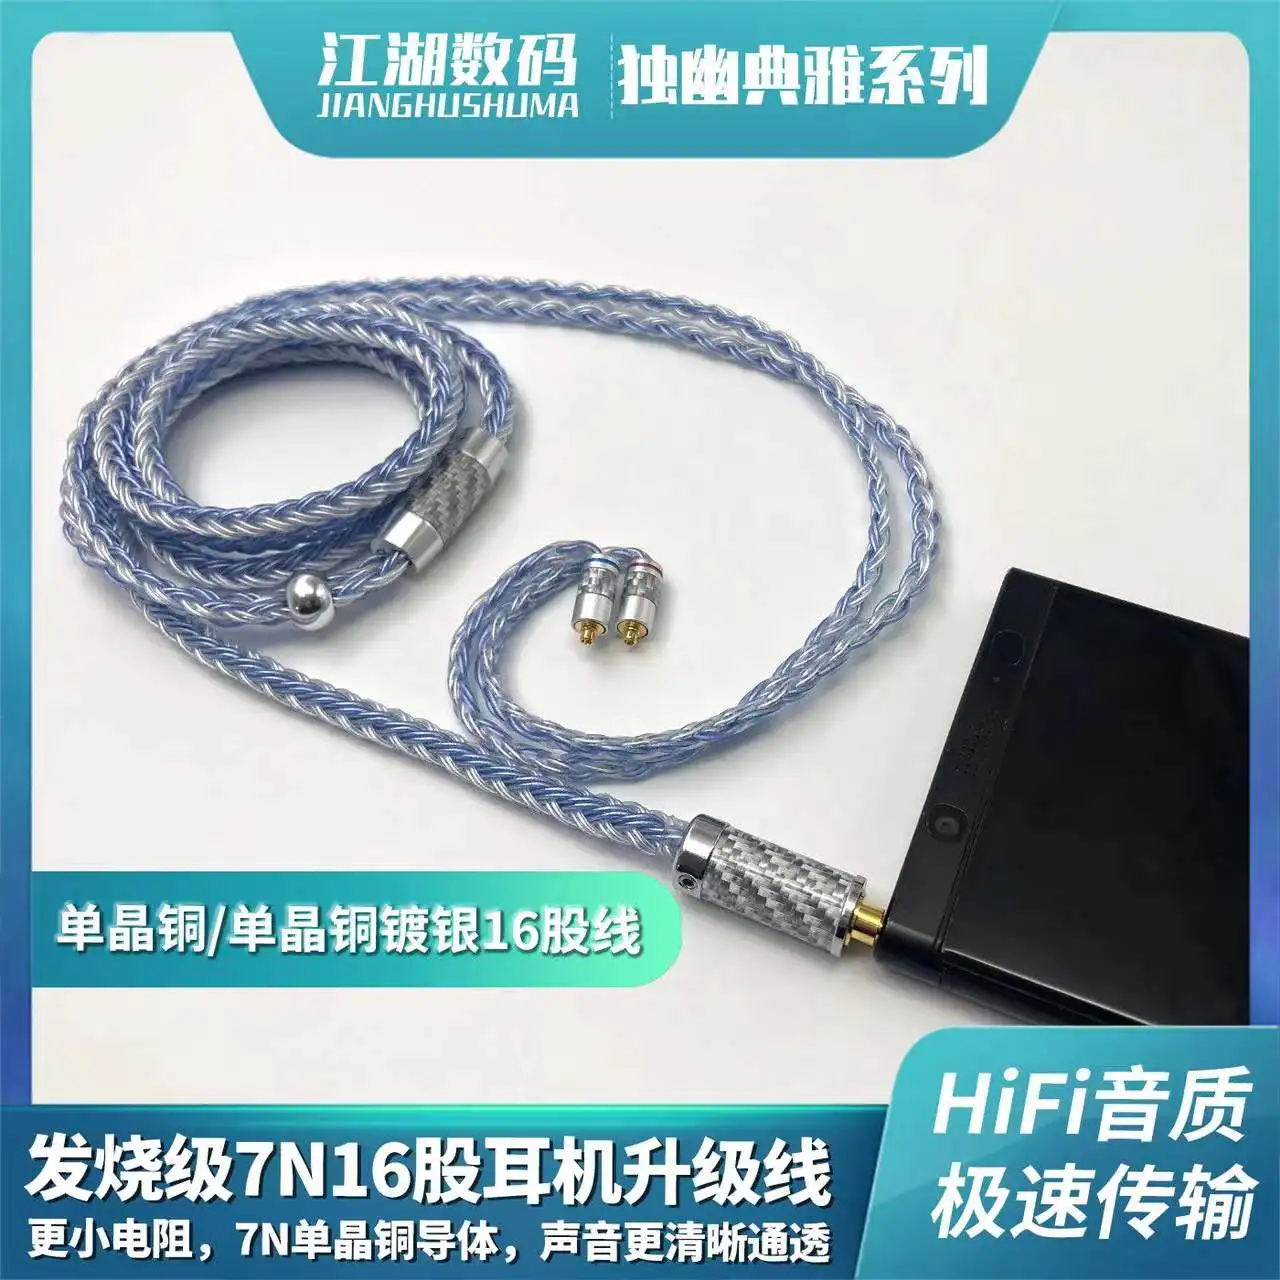 16-Strands Bold Headphone Cable A2DC QDC IE80 IE400 IM IPXUE6 Live MMCX 0.78 2Pin 2.5/4.4/3.5mm TYPE-C Lighting Earphone enlarge